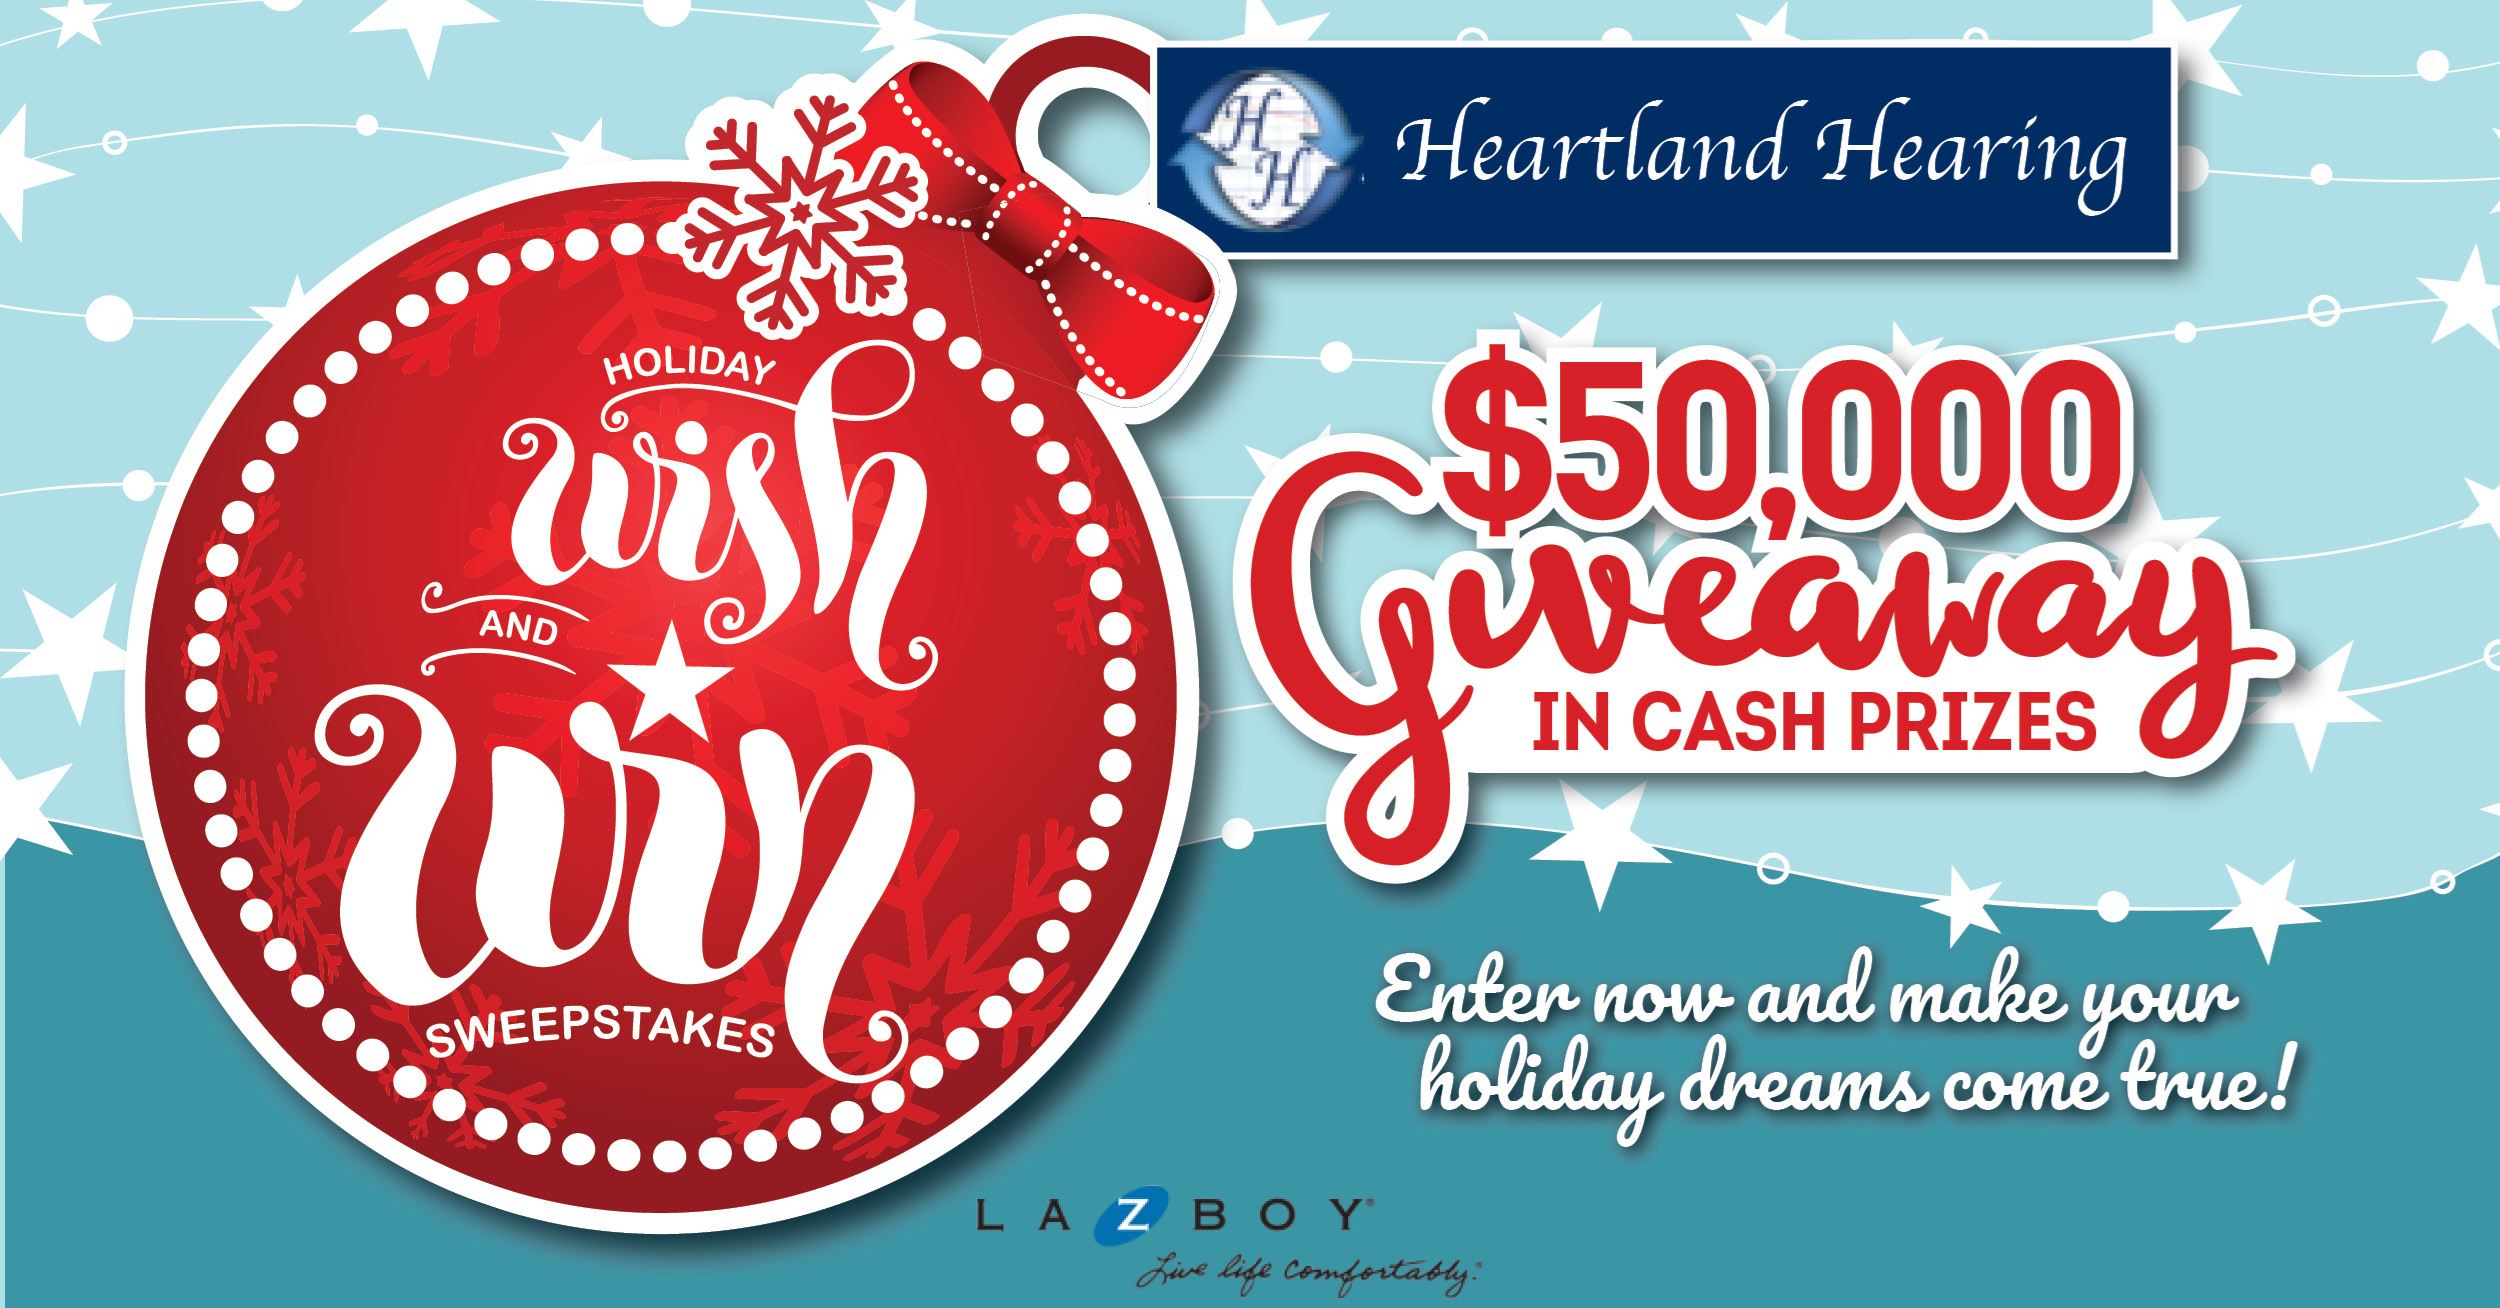 2020 Holiday Wish and Win Sweepstakes